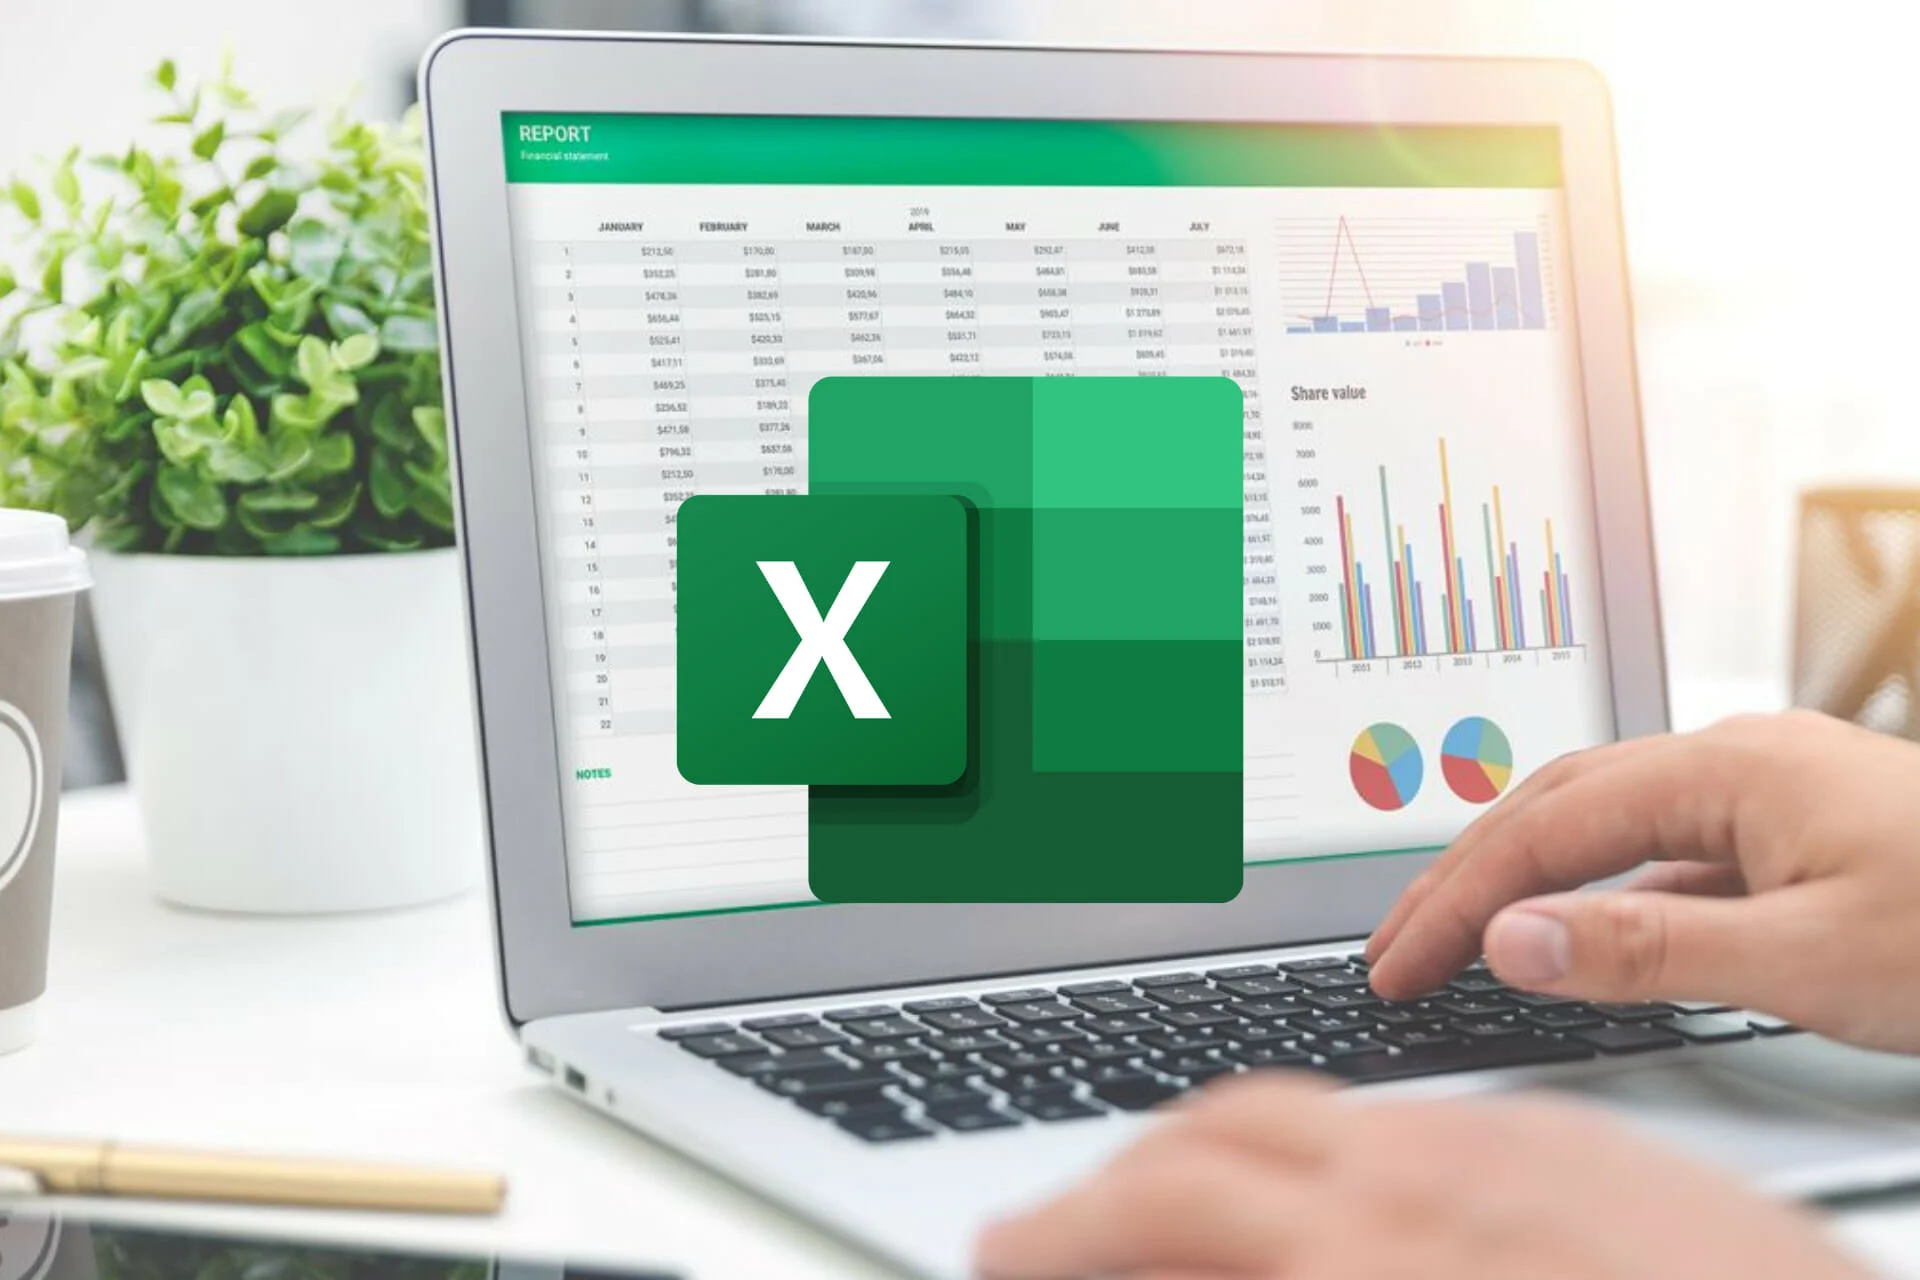 How to find duplicates in excel